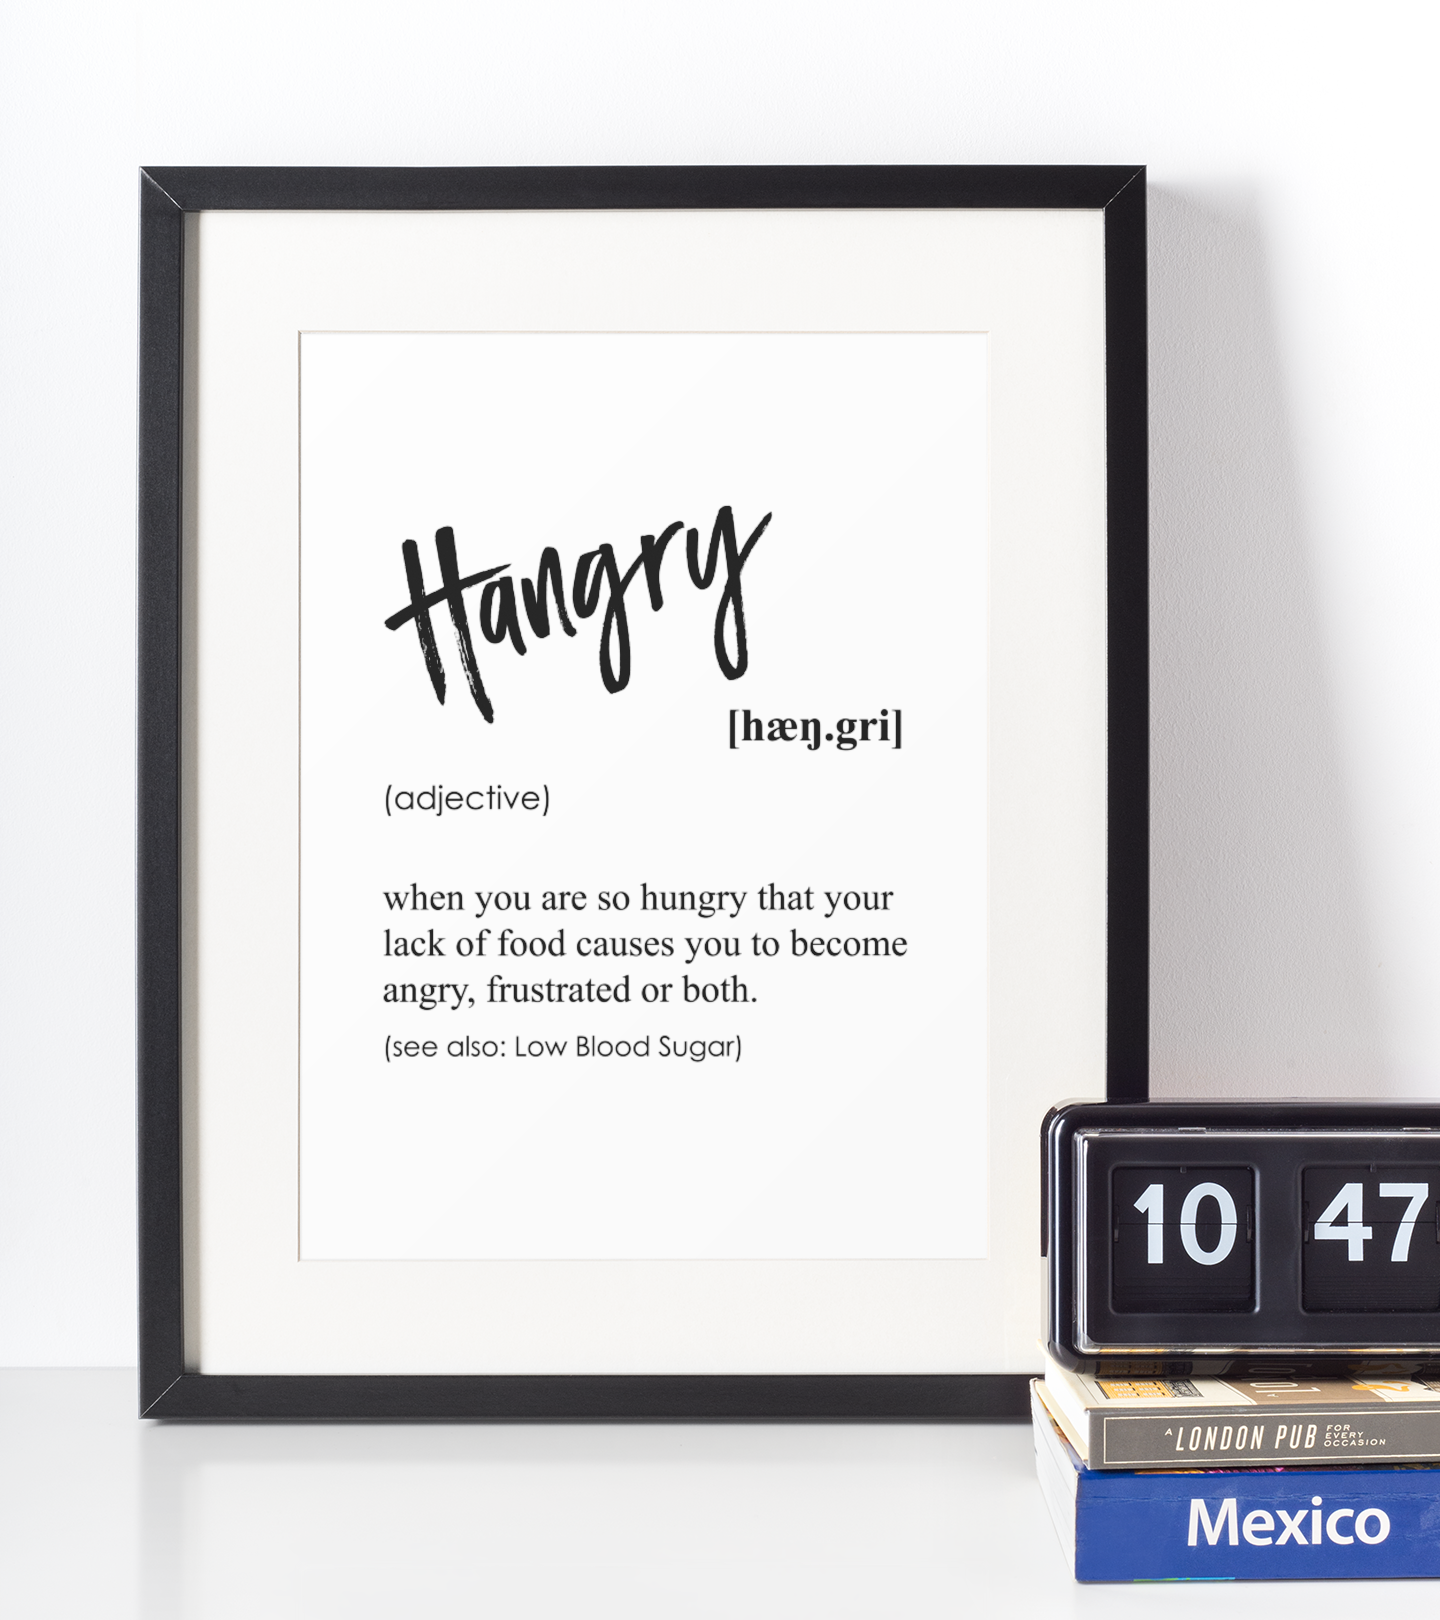 Hangry definition plakat